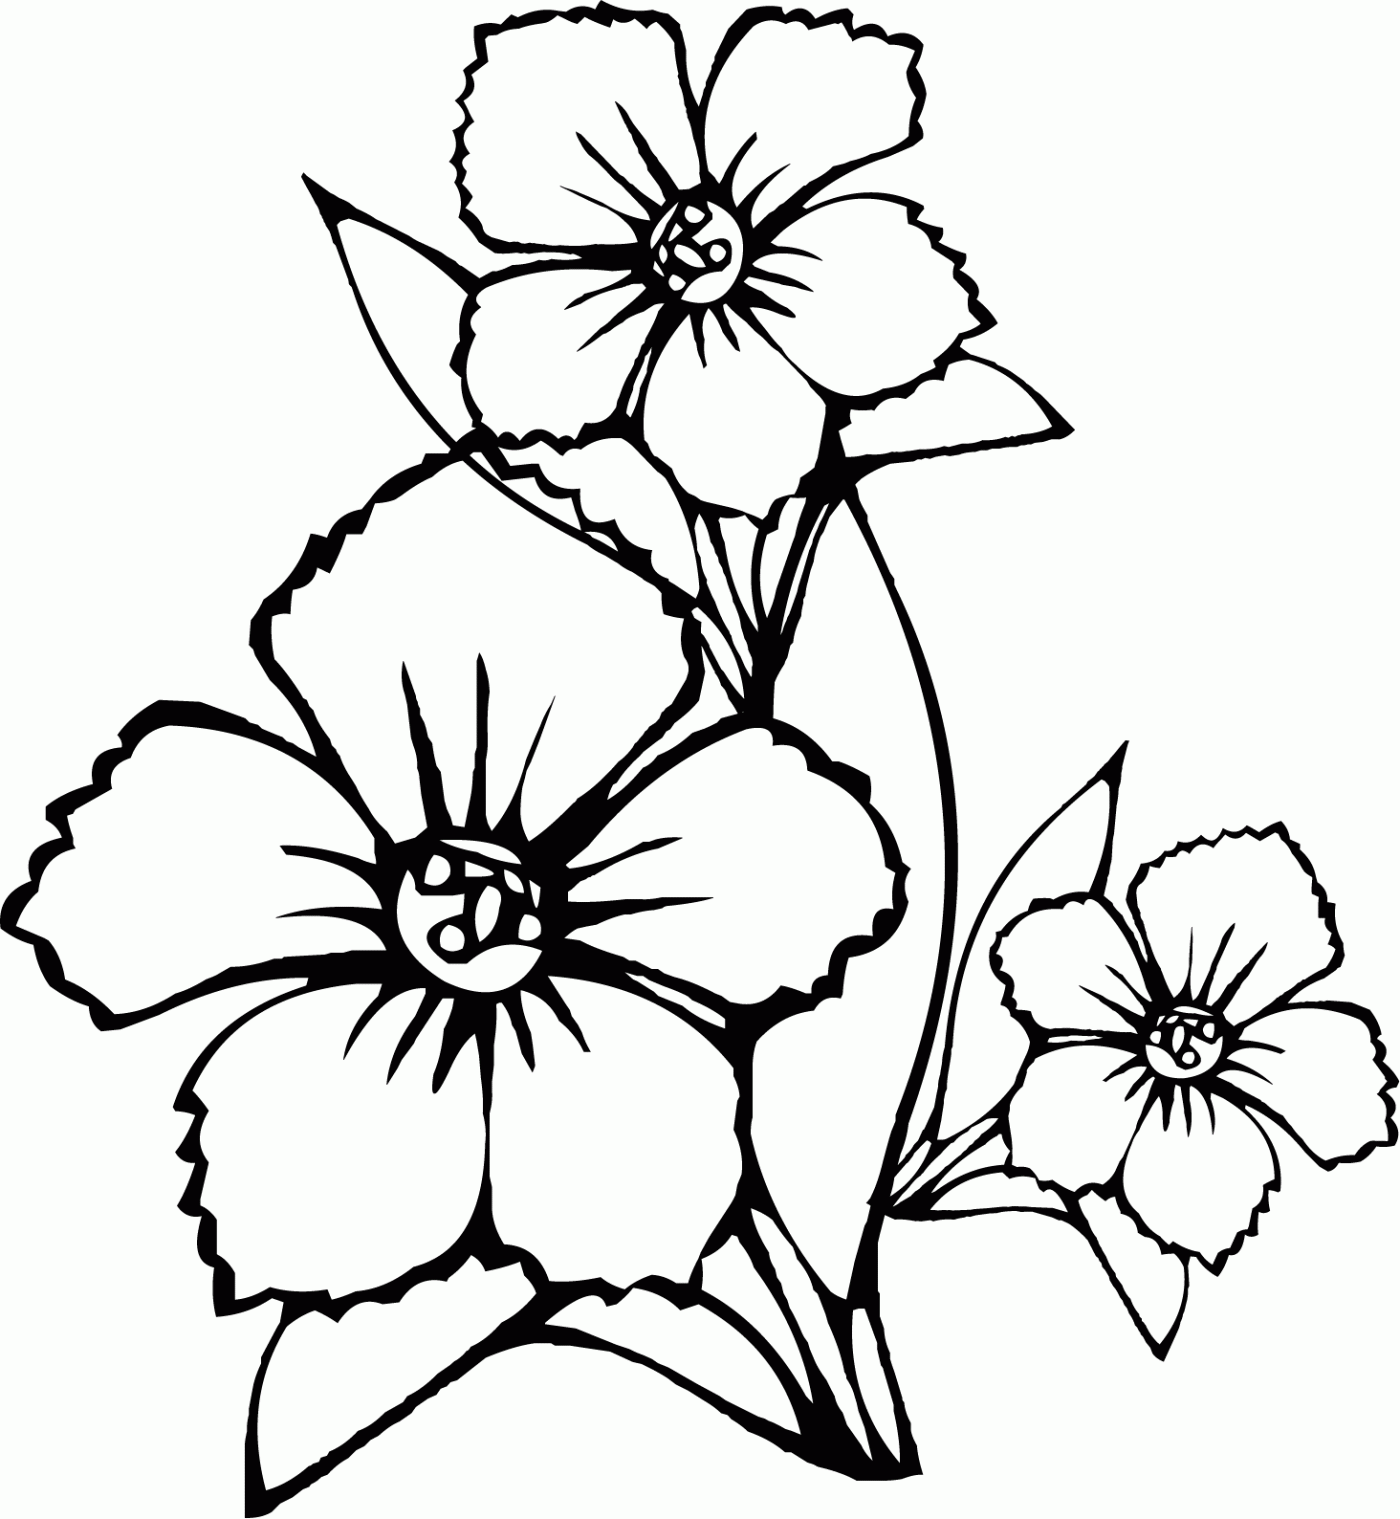 coloring-pages-flowers-for-kids | Free Coloring Pages on Masivy World